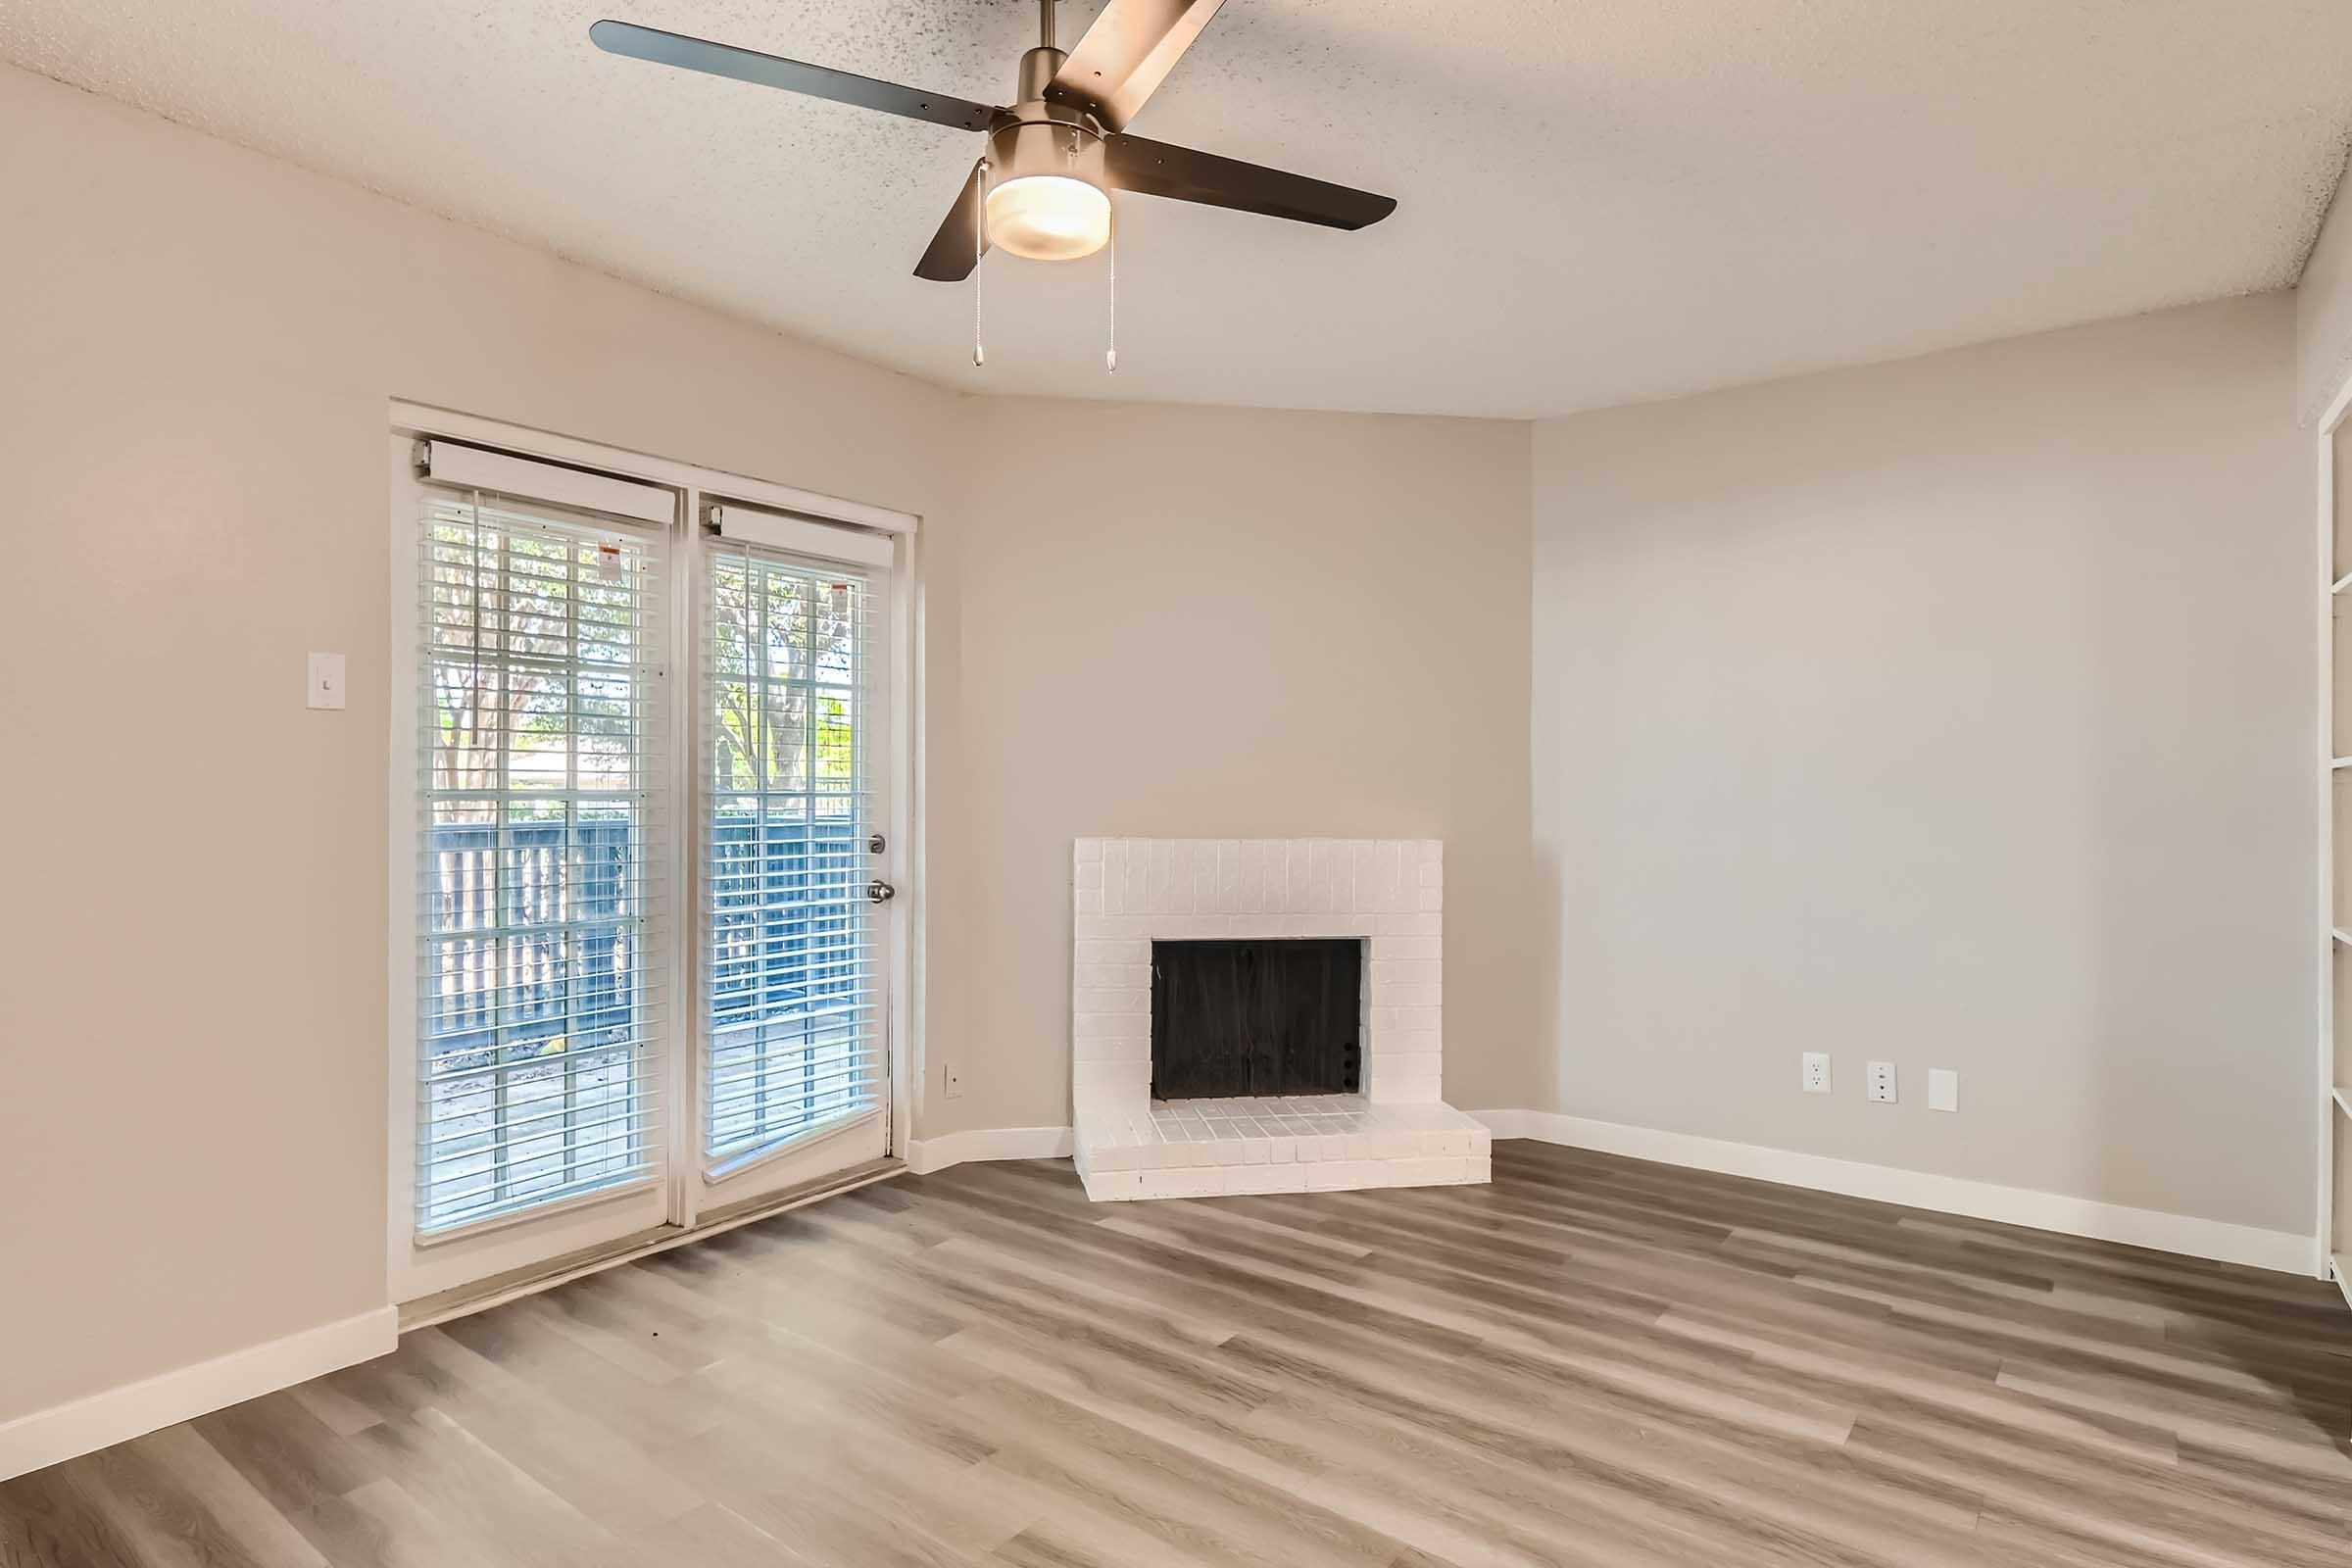 A living room with wood-style floors and glass doors leading to the balcony at Rise North Arlington.